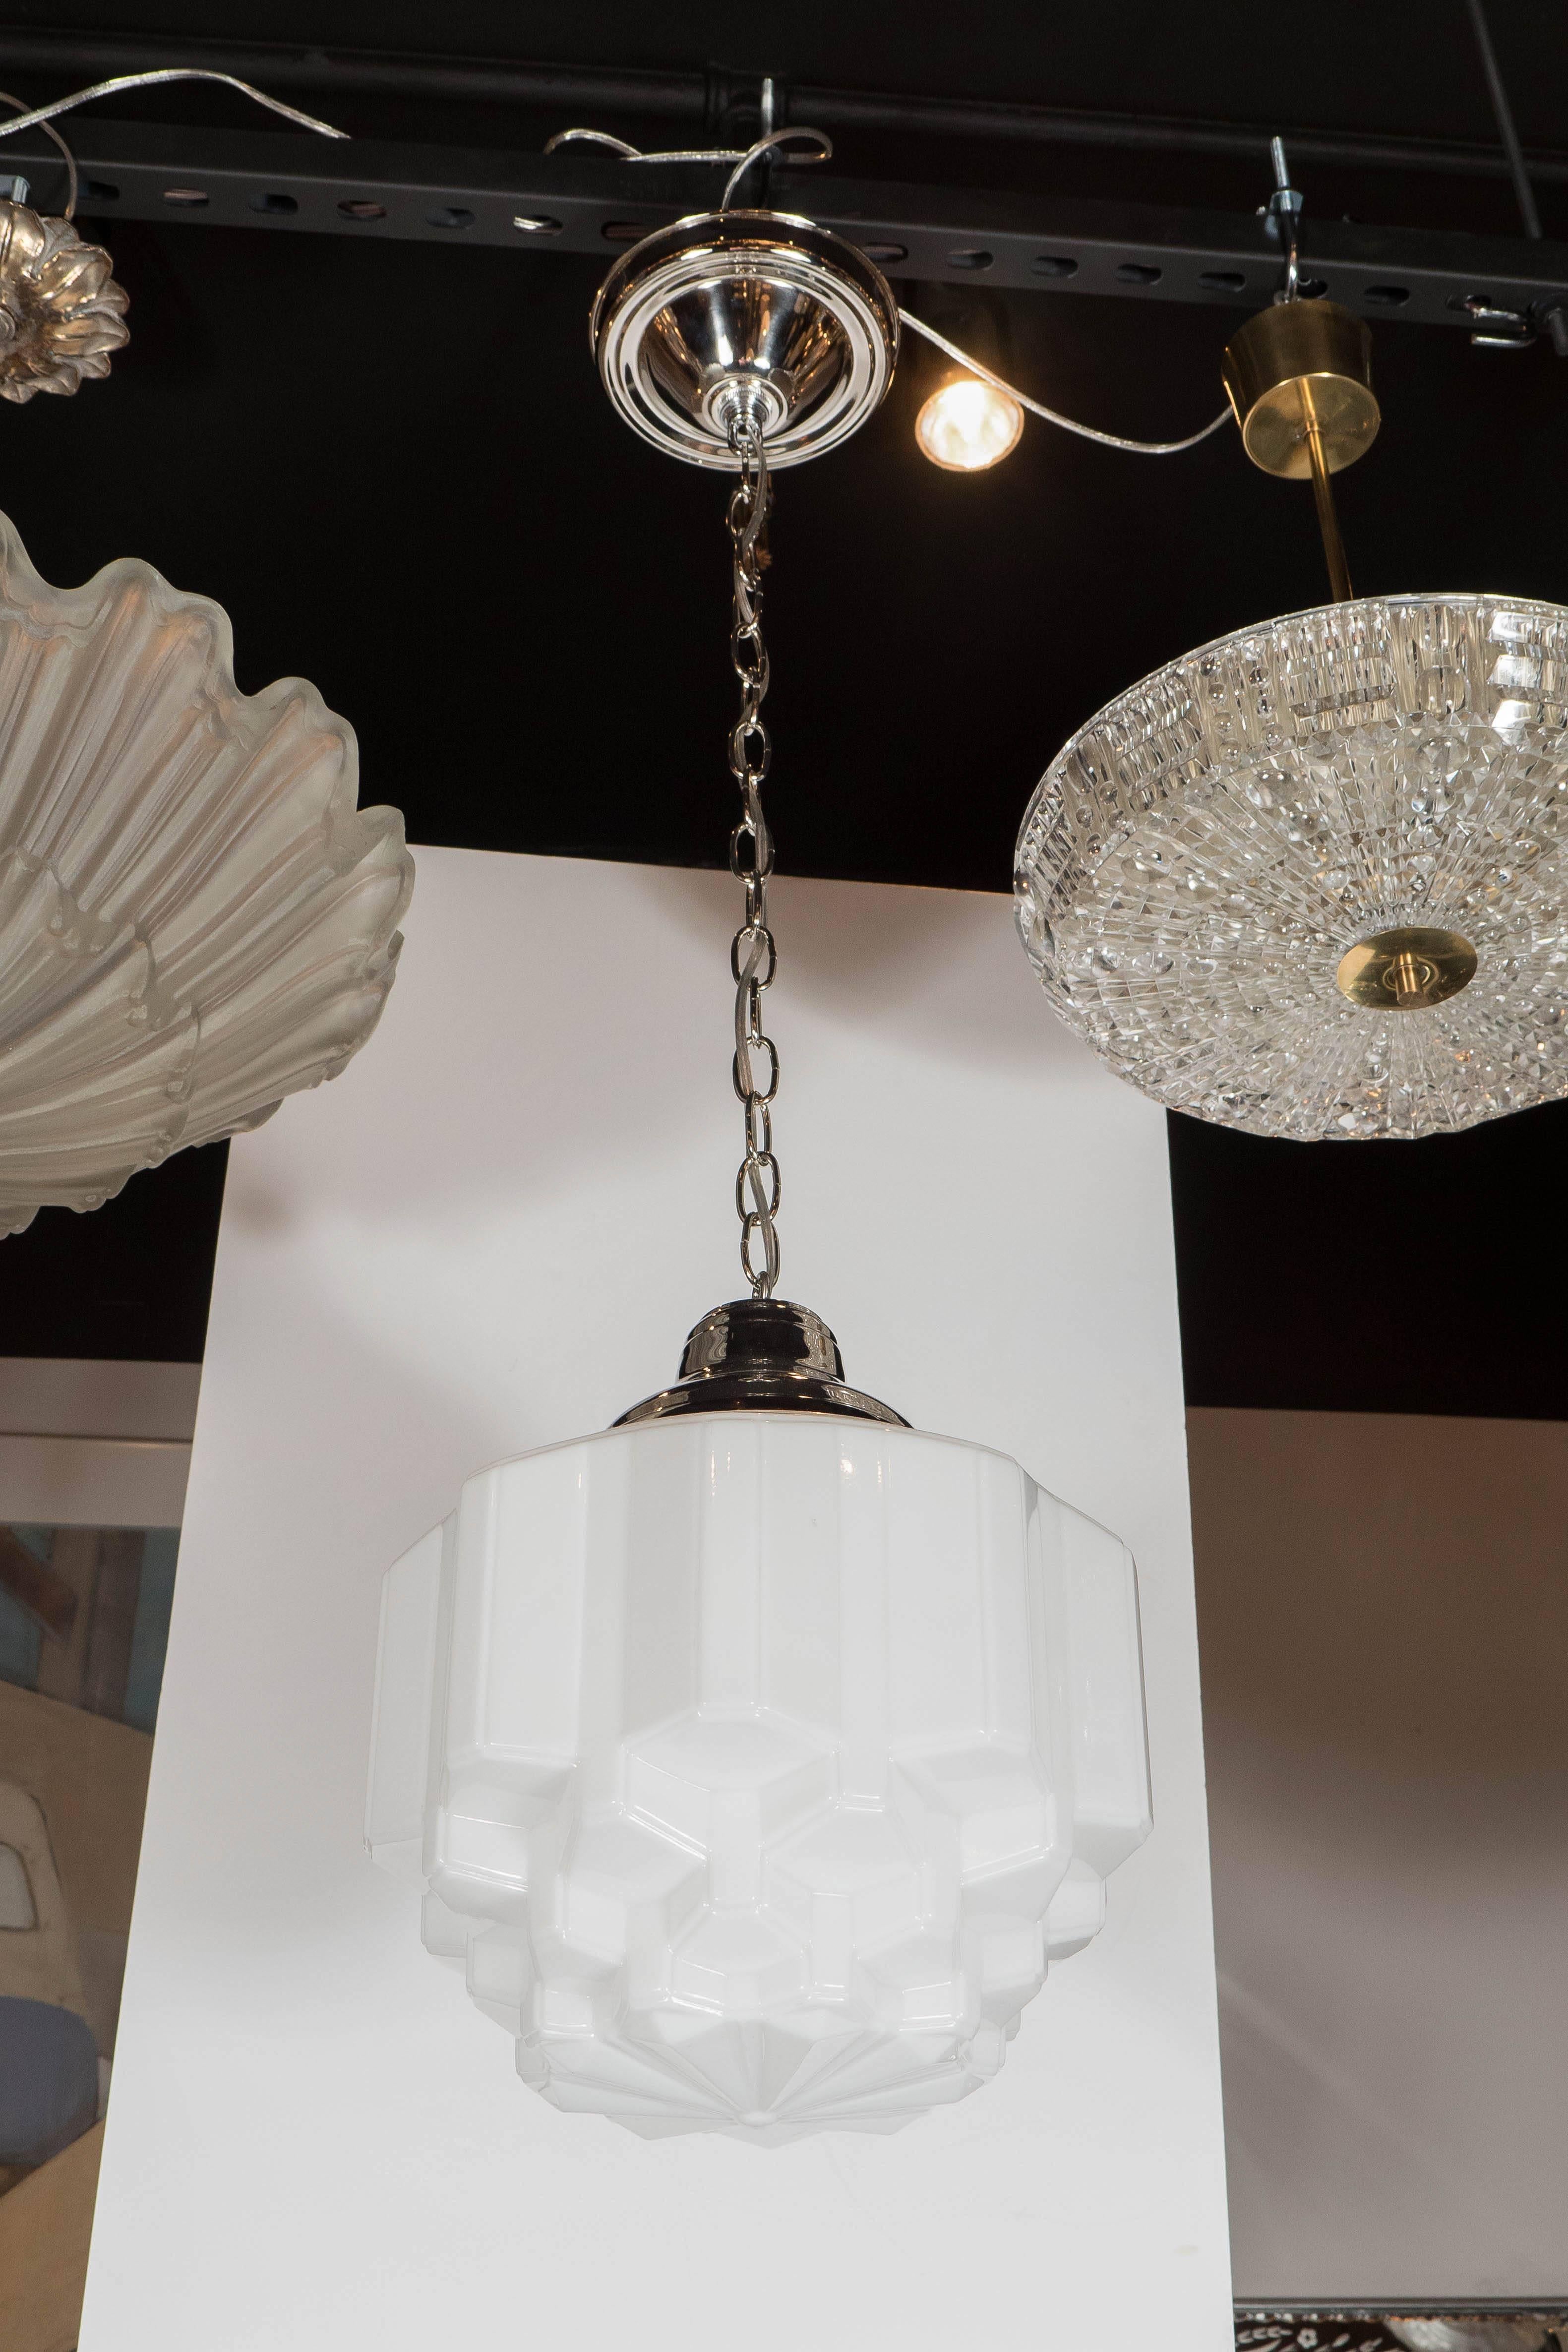 This Art Deco pendant chandelier is made of hand molded white milk glass with skyscraper details and has polished nickel fittings. When viewed from underneath is has a honeycomb-like structure. It can also be used as a flush mount chandelier and has